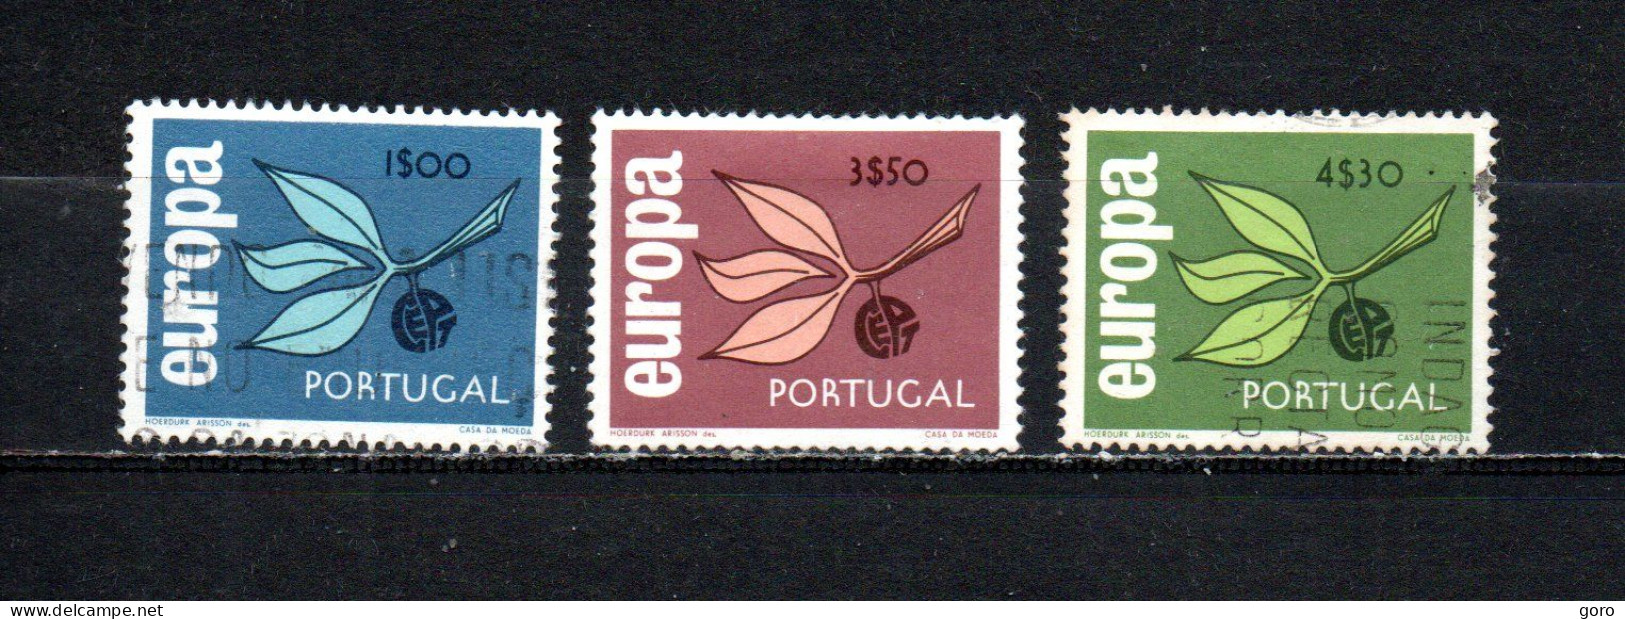 Portugal   1965  .-   971/973 - Used Stamps